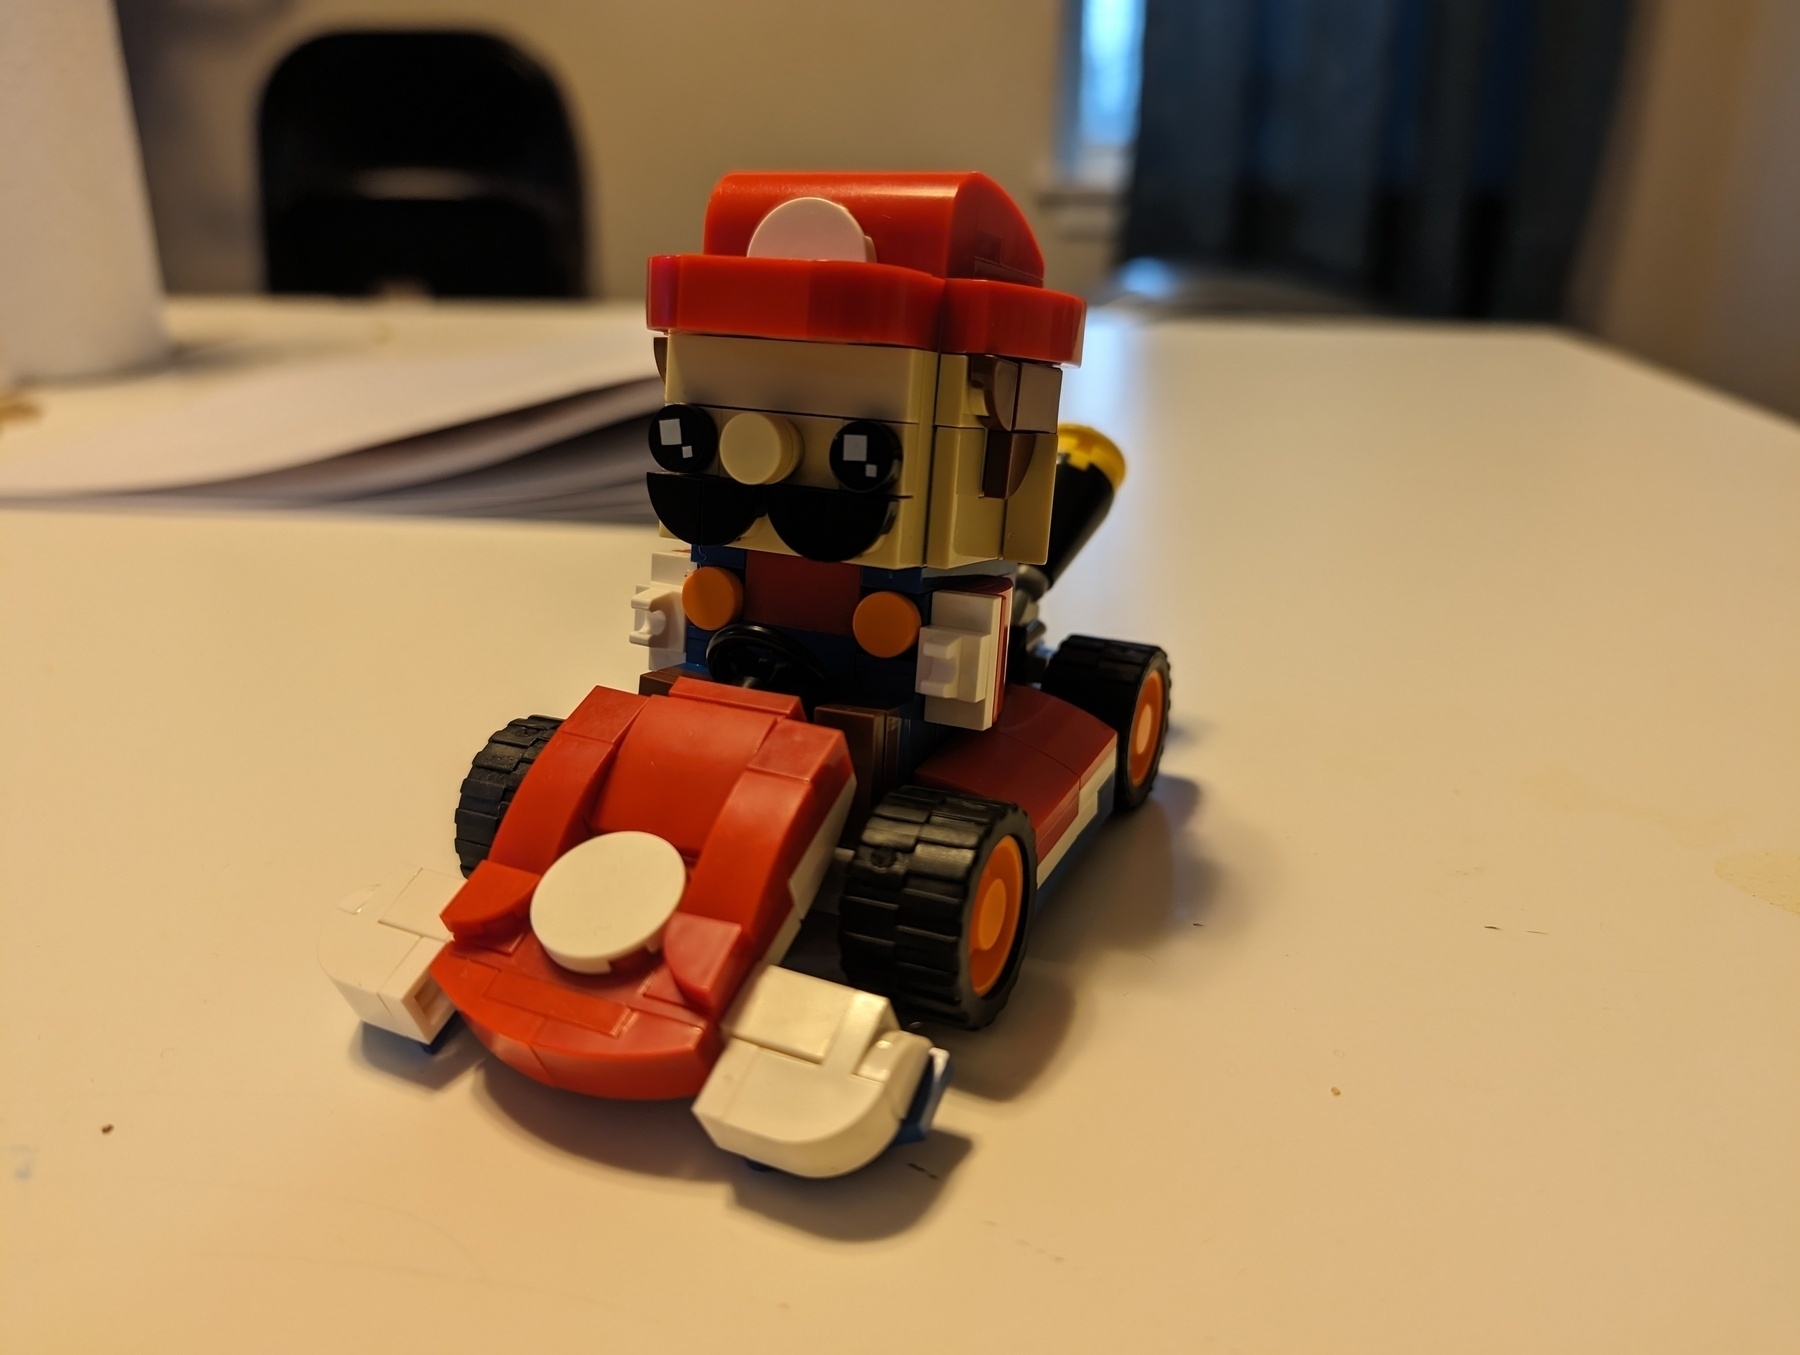 Photo of a figure built out of a brick building system, in the style of a popular character that can sit in a go cart. Any resemblance to any known character is purely coincidental.